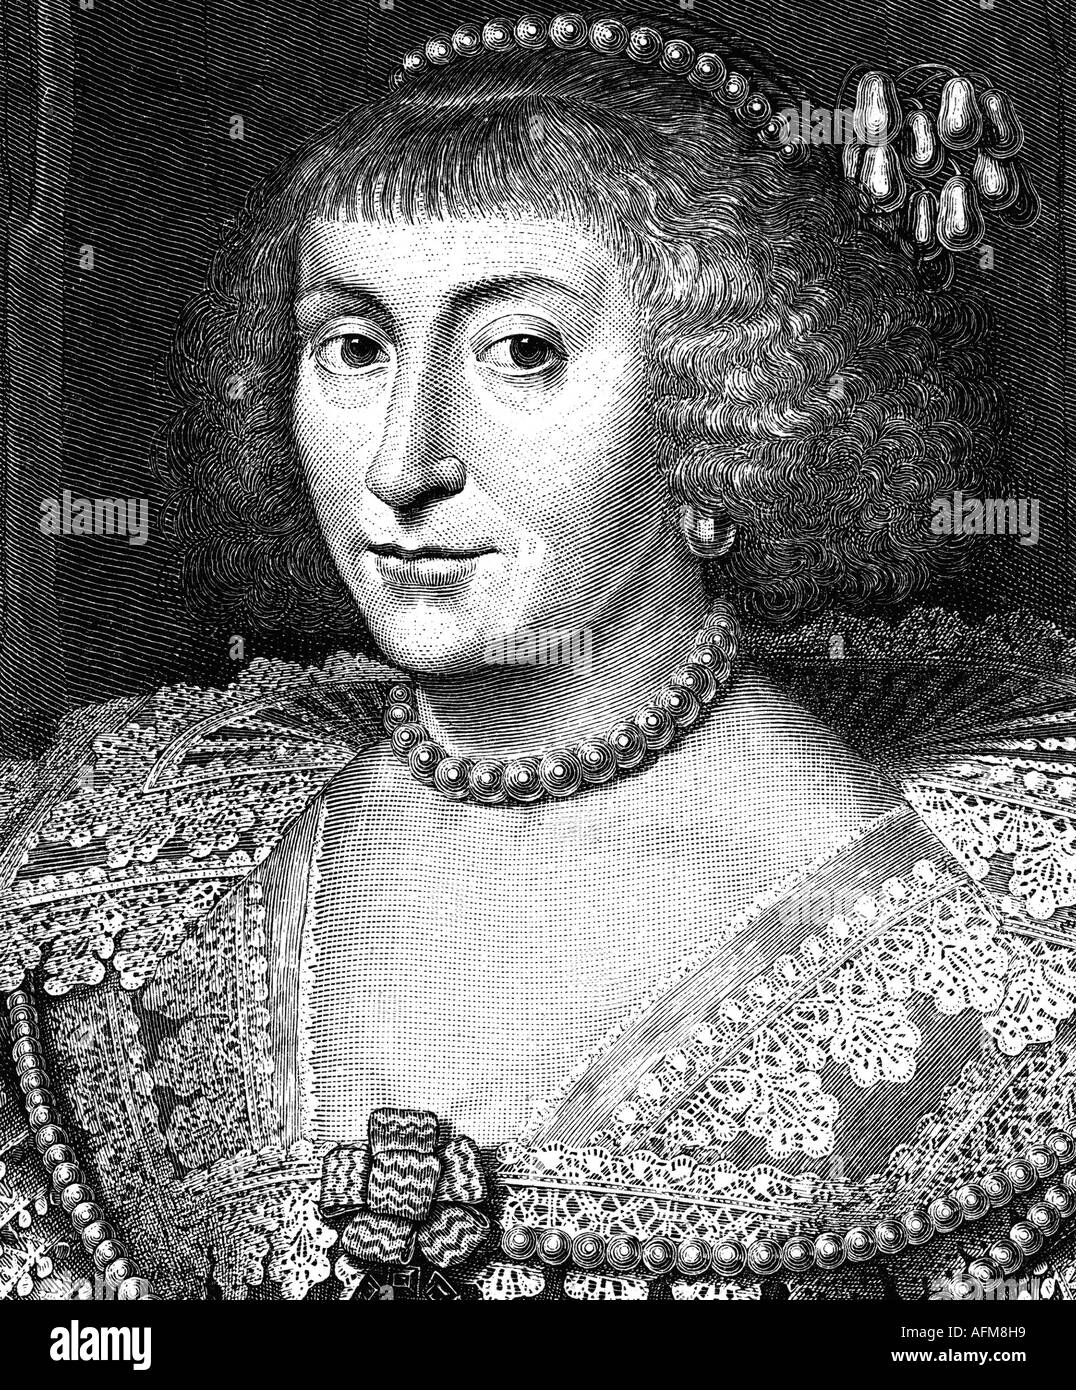 Elizabeth, 19.8.1556 - 13.12.1662, Electress of Palatinate 14.2.1613 - 23.2.1623, Queen consort of Bohemia 25.10.1619 - November 1620, portrait, after conteporary picture, Stuart, Princess of England & Scotland, Wittelsbach, thirty years war, jewelry, pearls, , Stock Photo